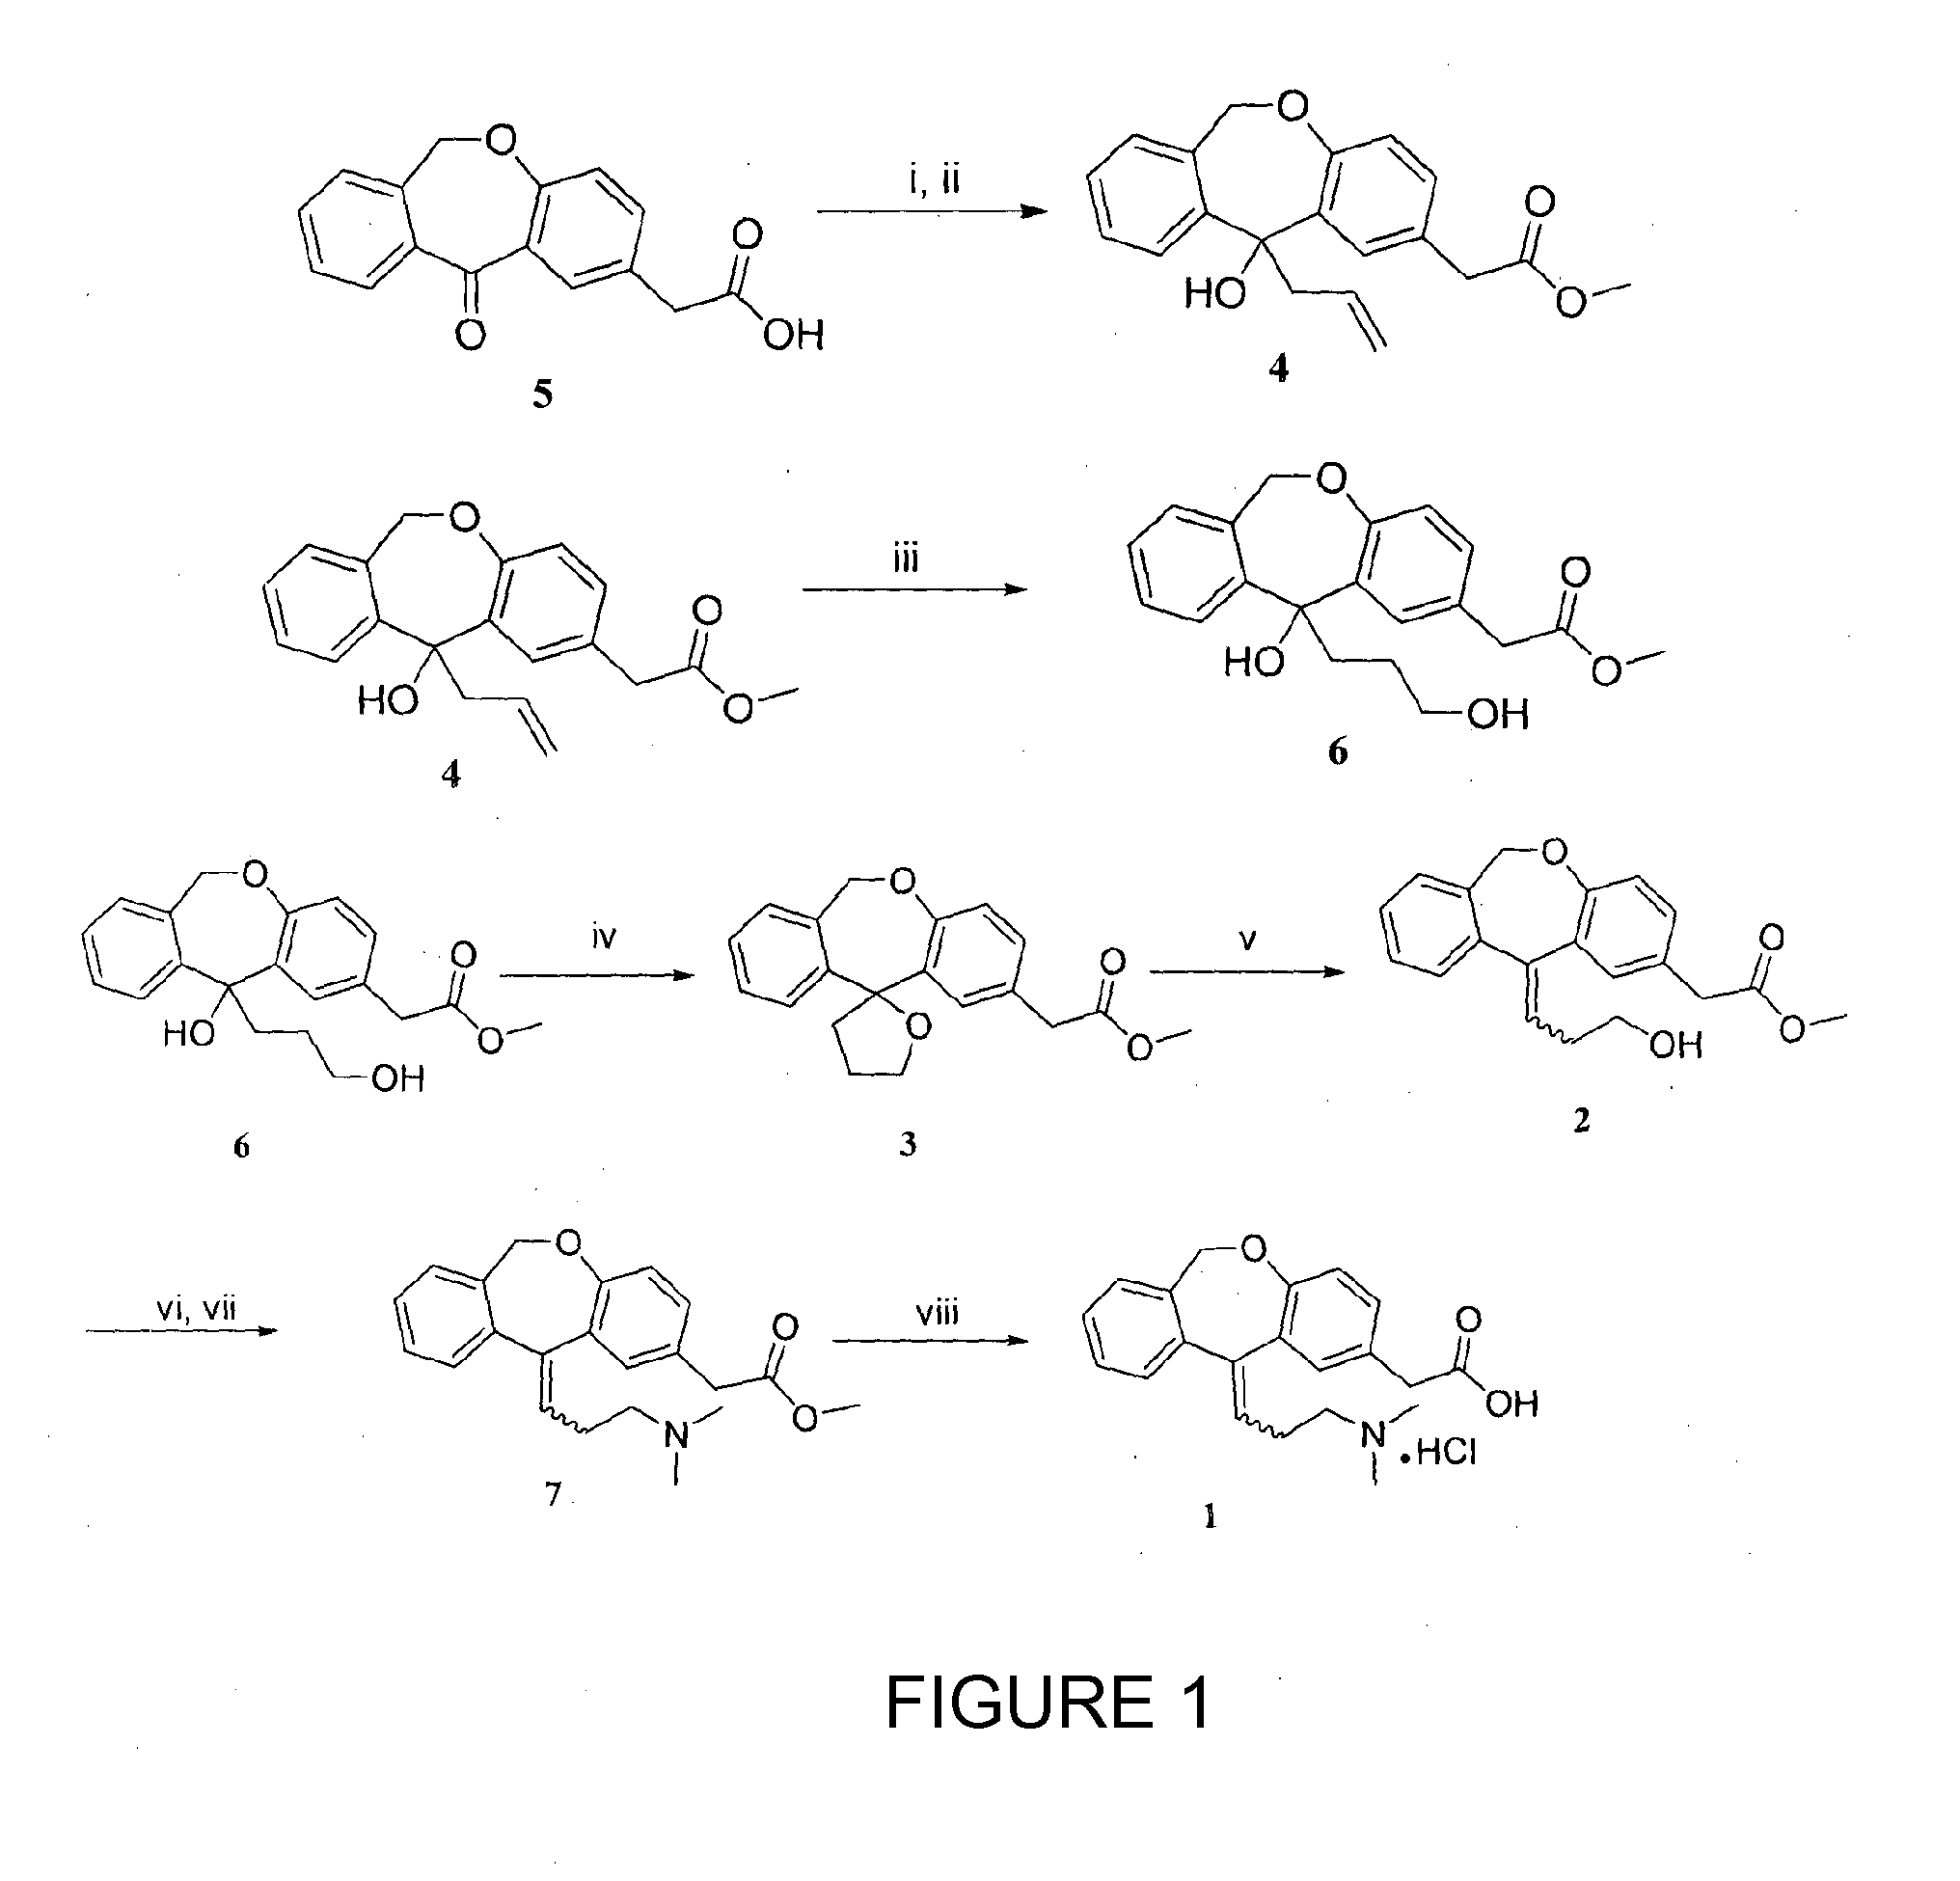 A process for the synthesis of olopatadine